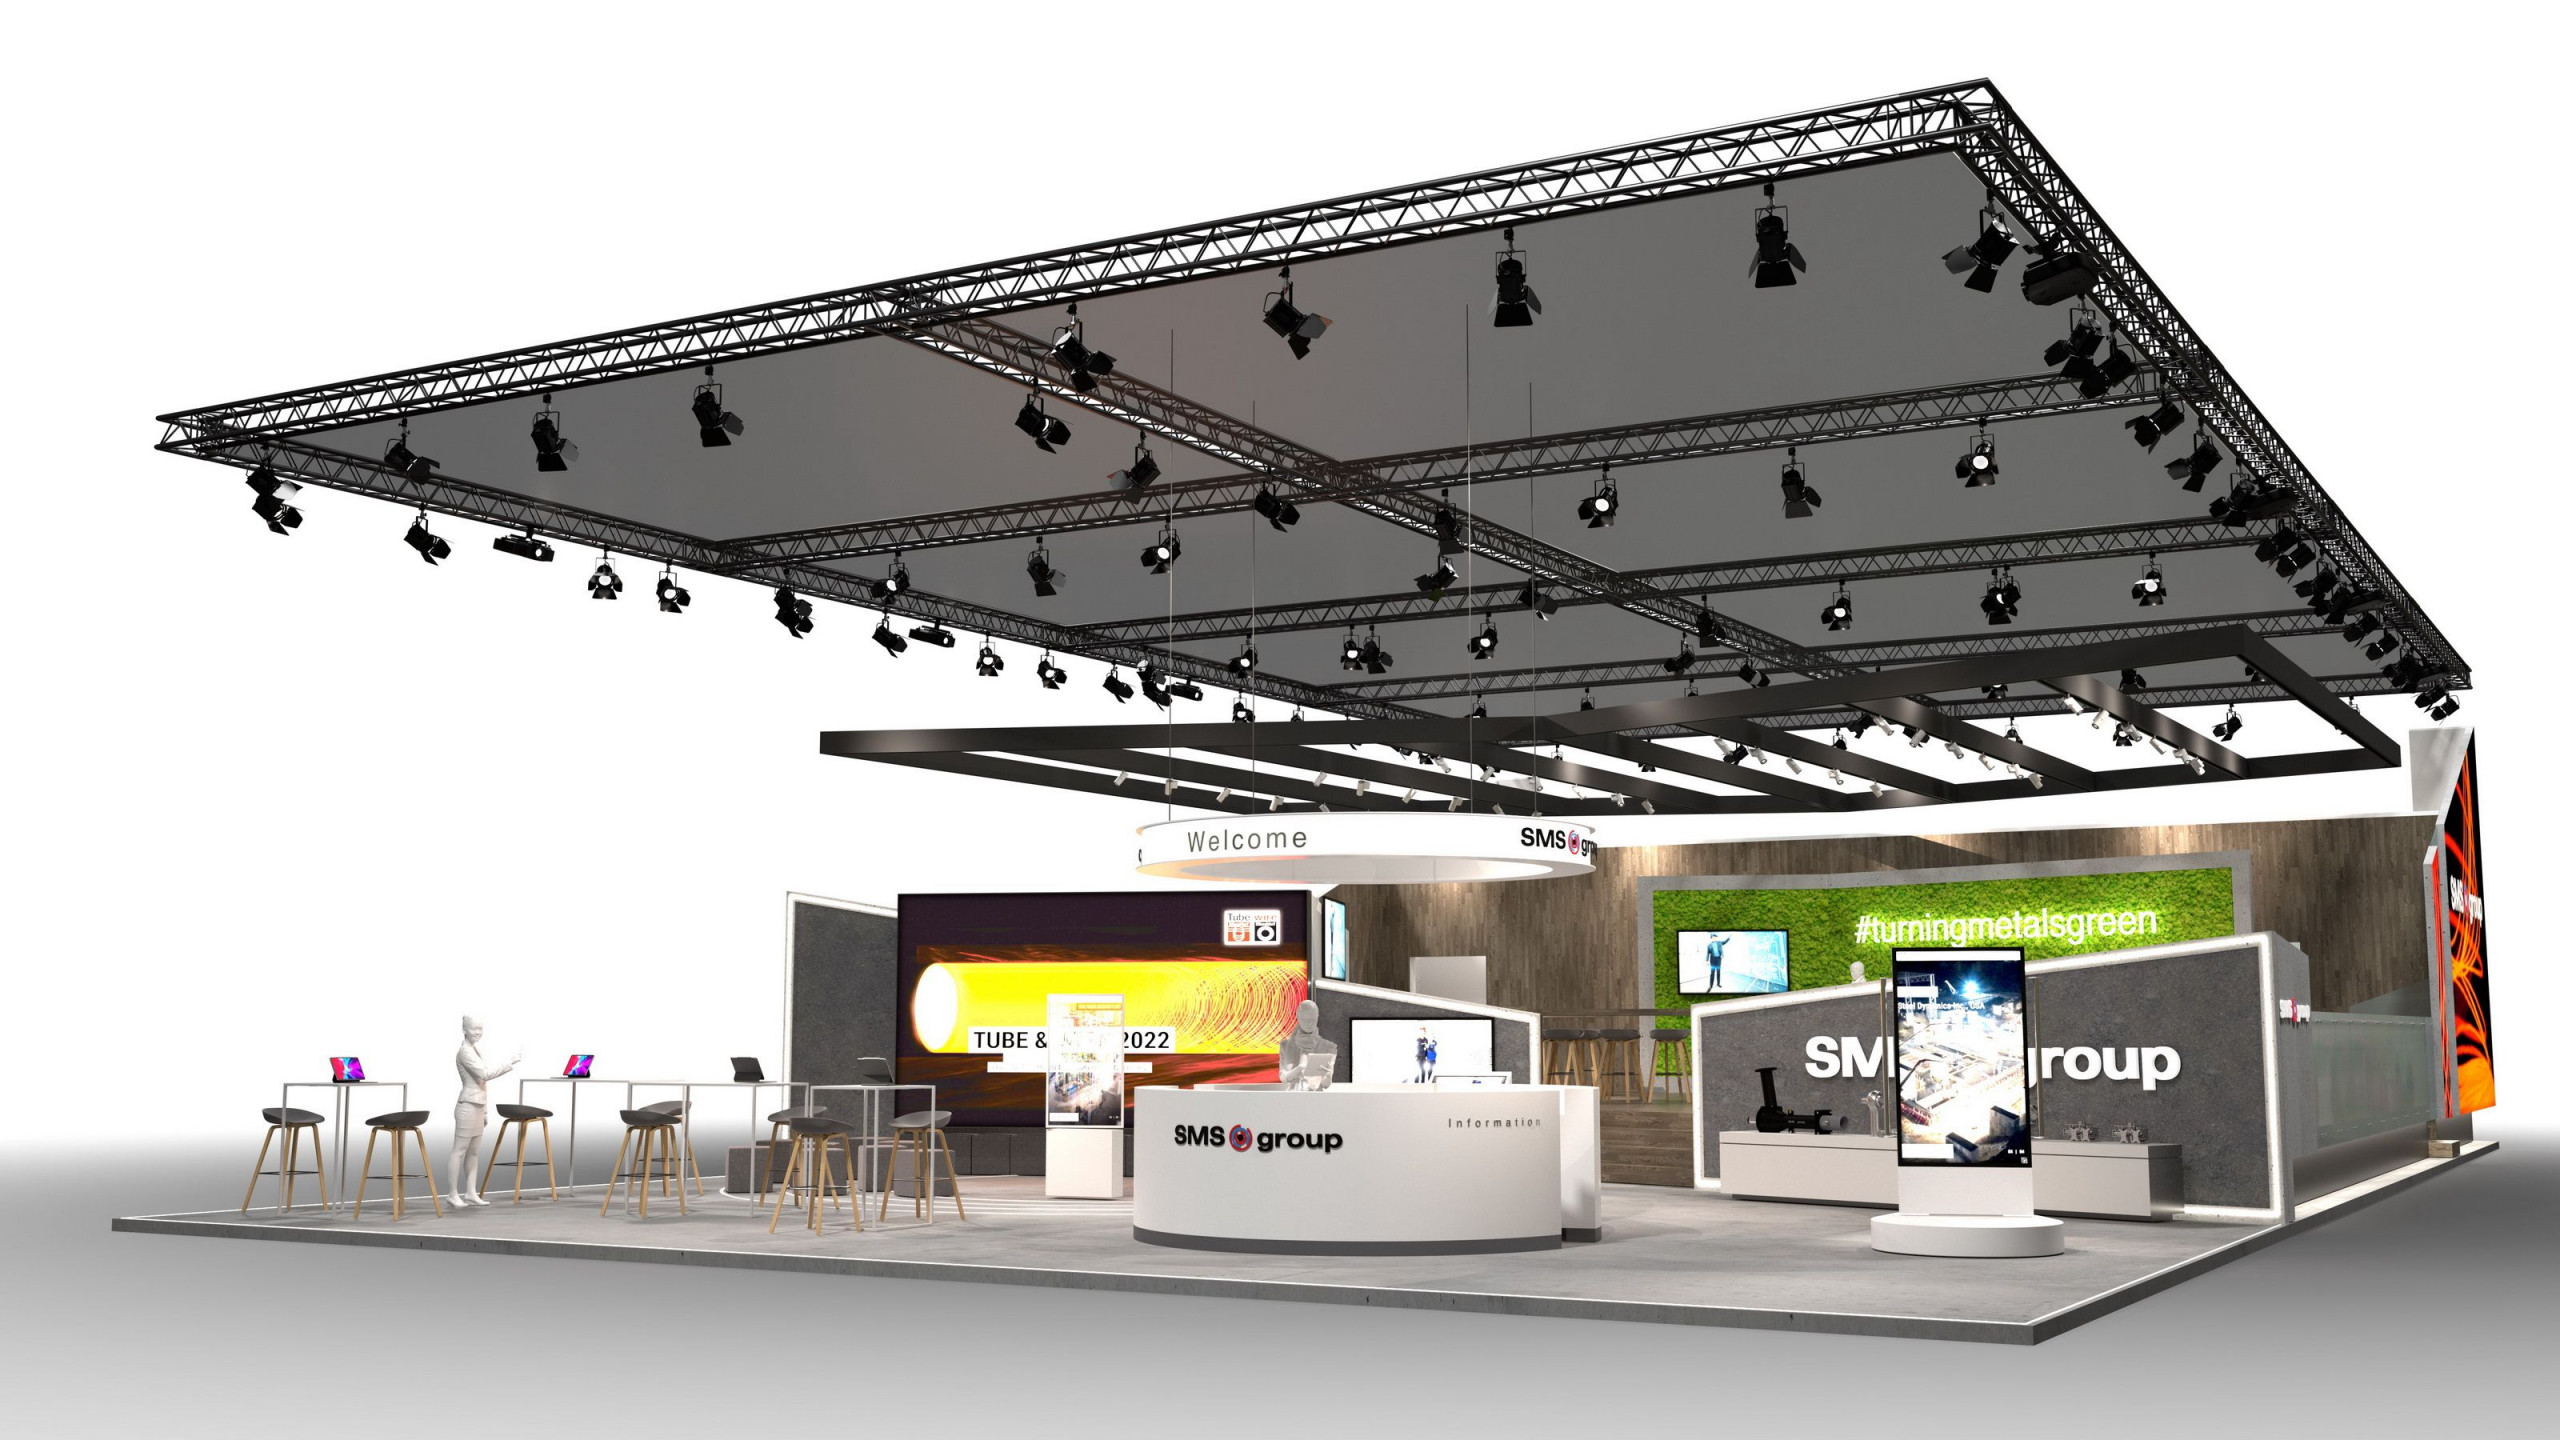 The 400 m² booth of the SMS Group in hall 7 at booth B04 at Tube & wire © SMS